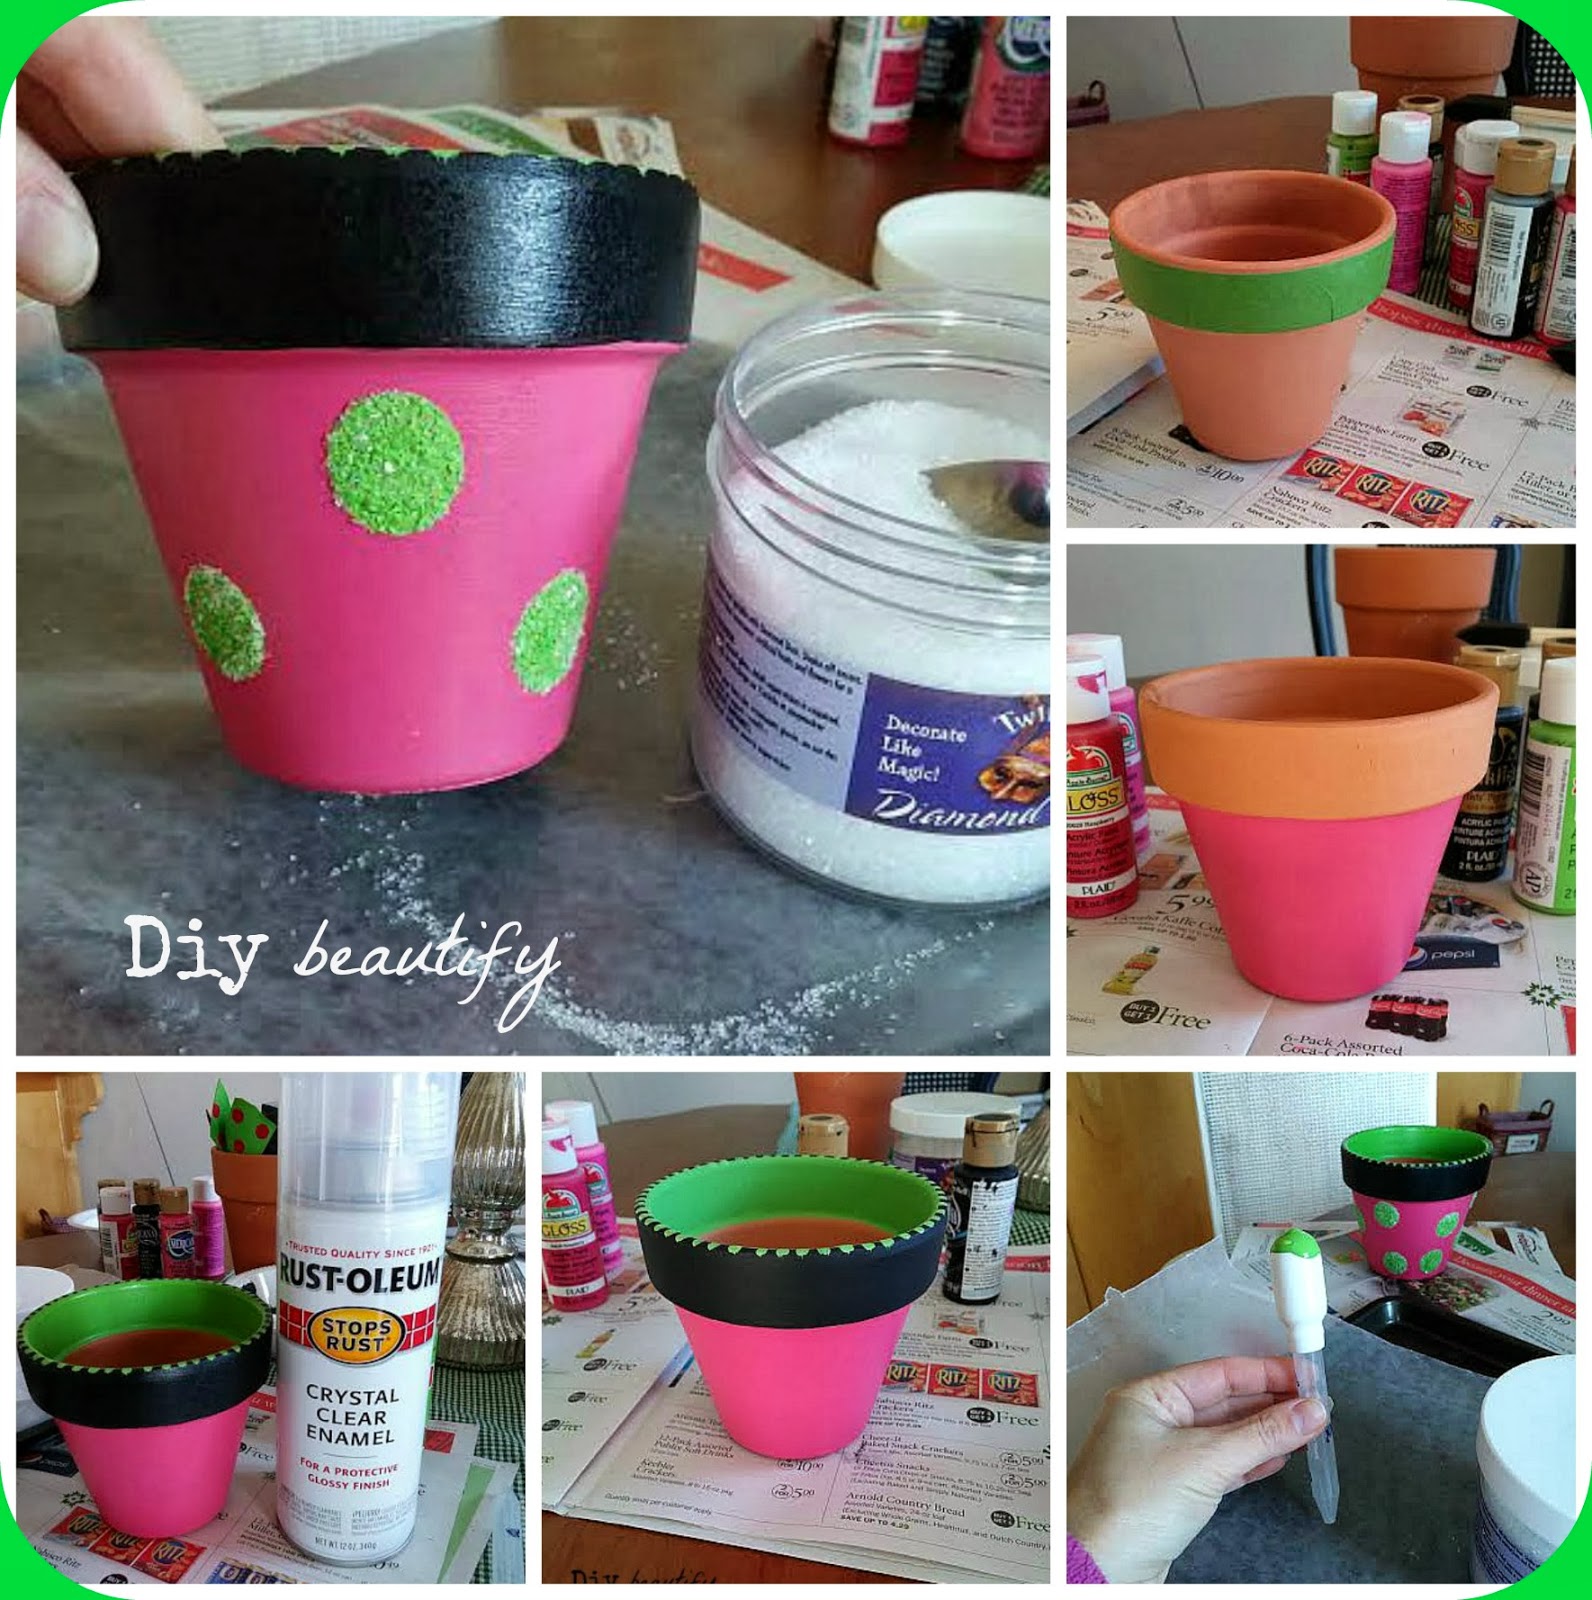 Last Minute Gift Idea for Teacher - DIY Beautify - Creating Beauty at Home